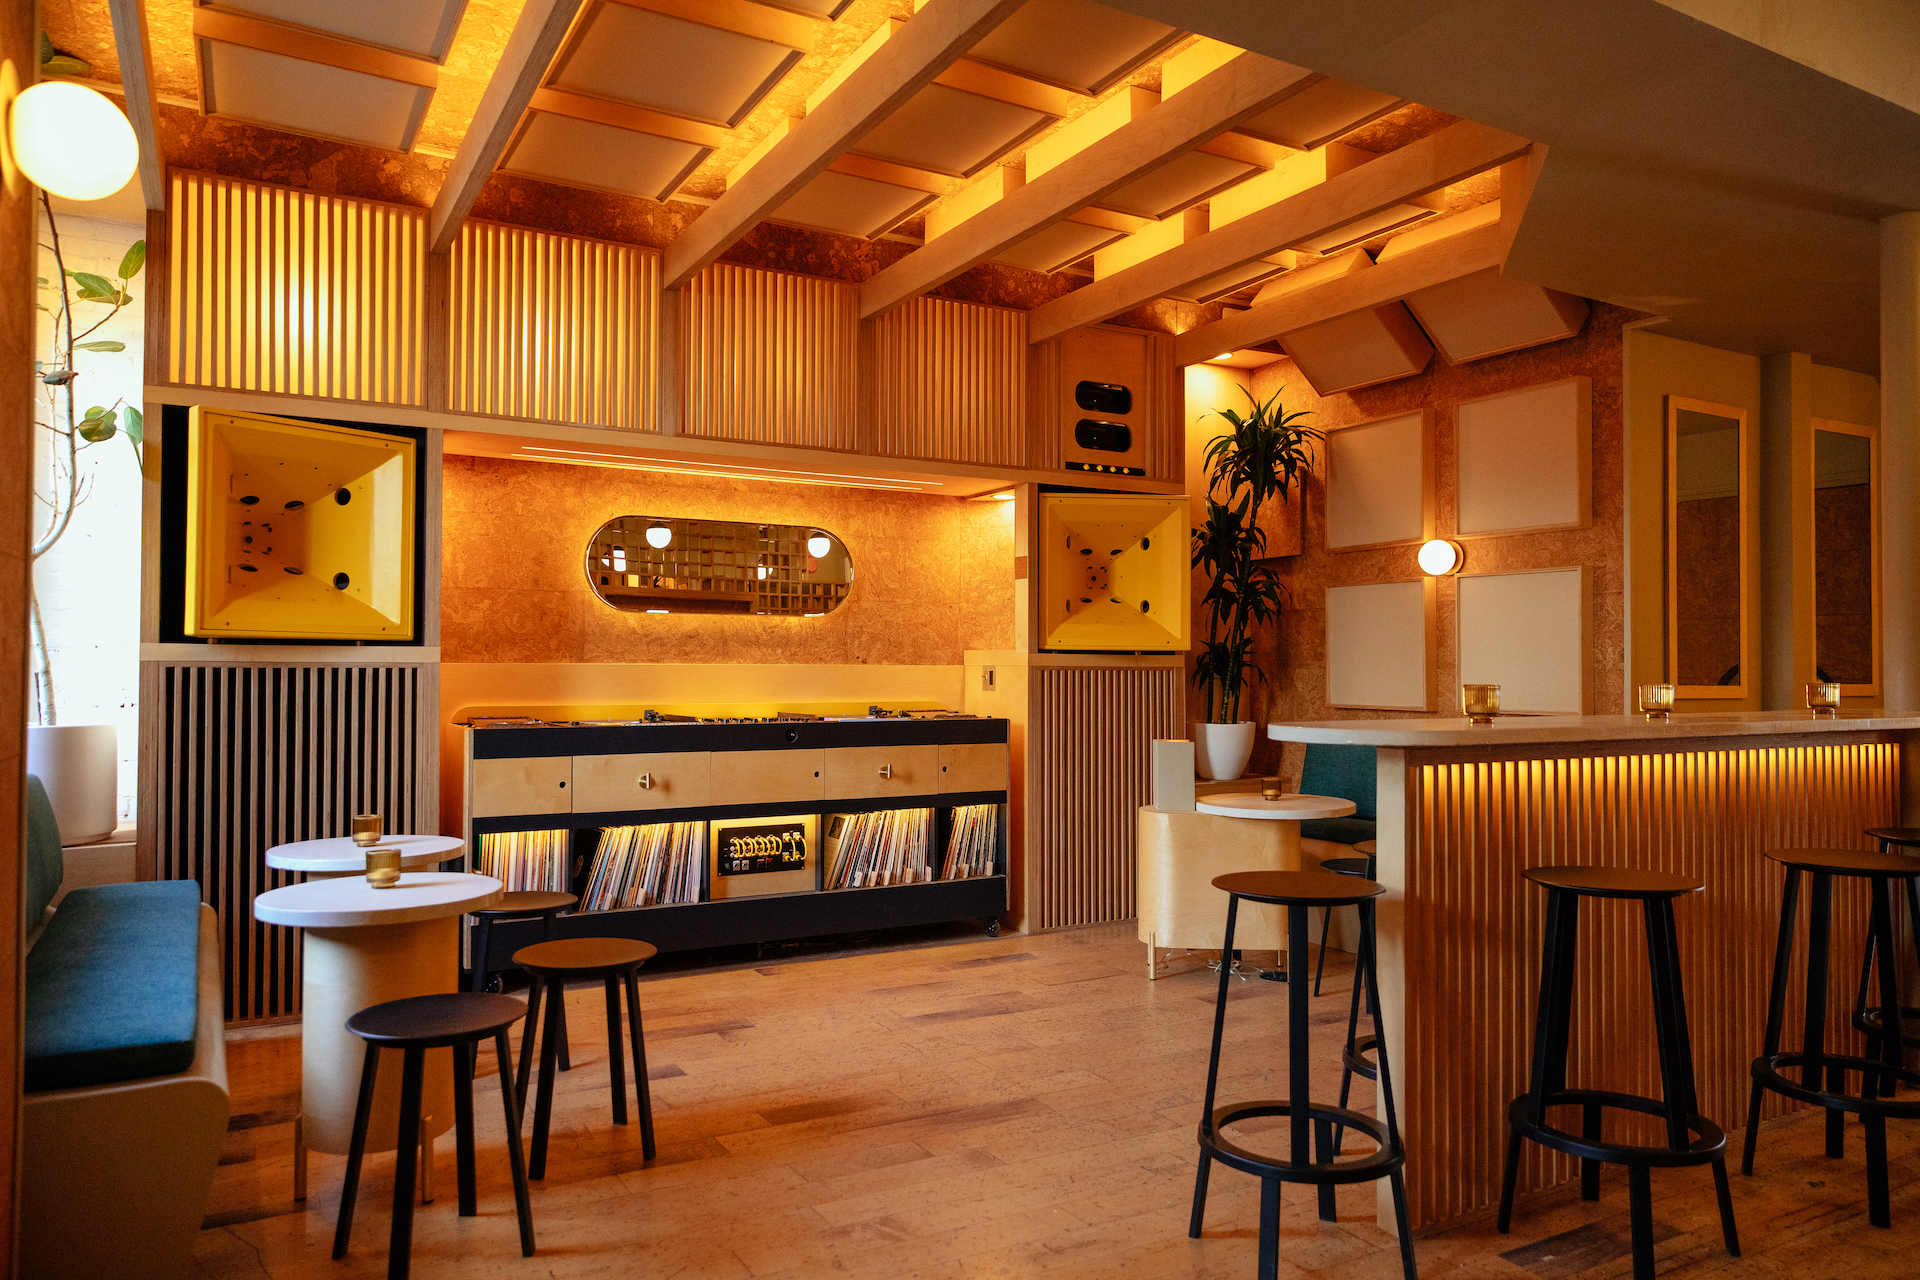 A wood paneled room is filled with records and small tables with black barstools.